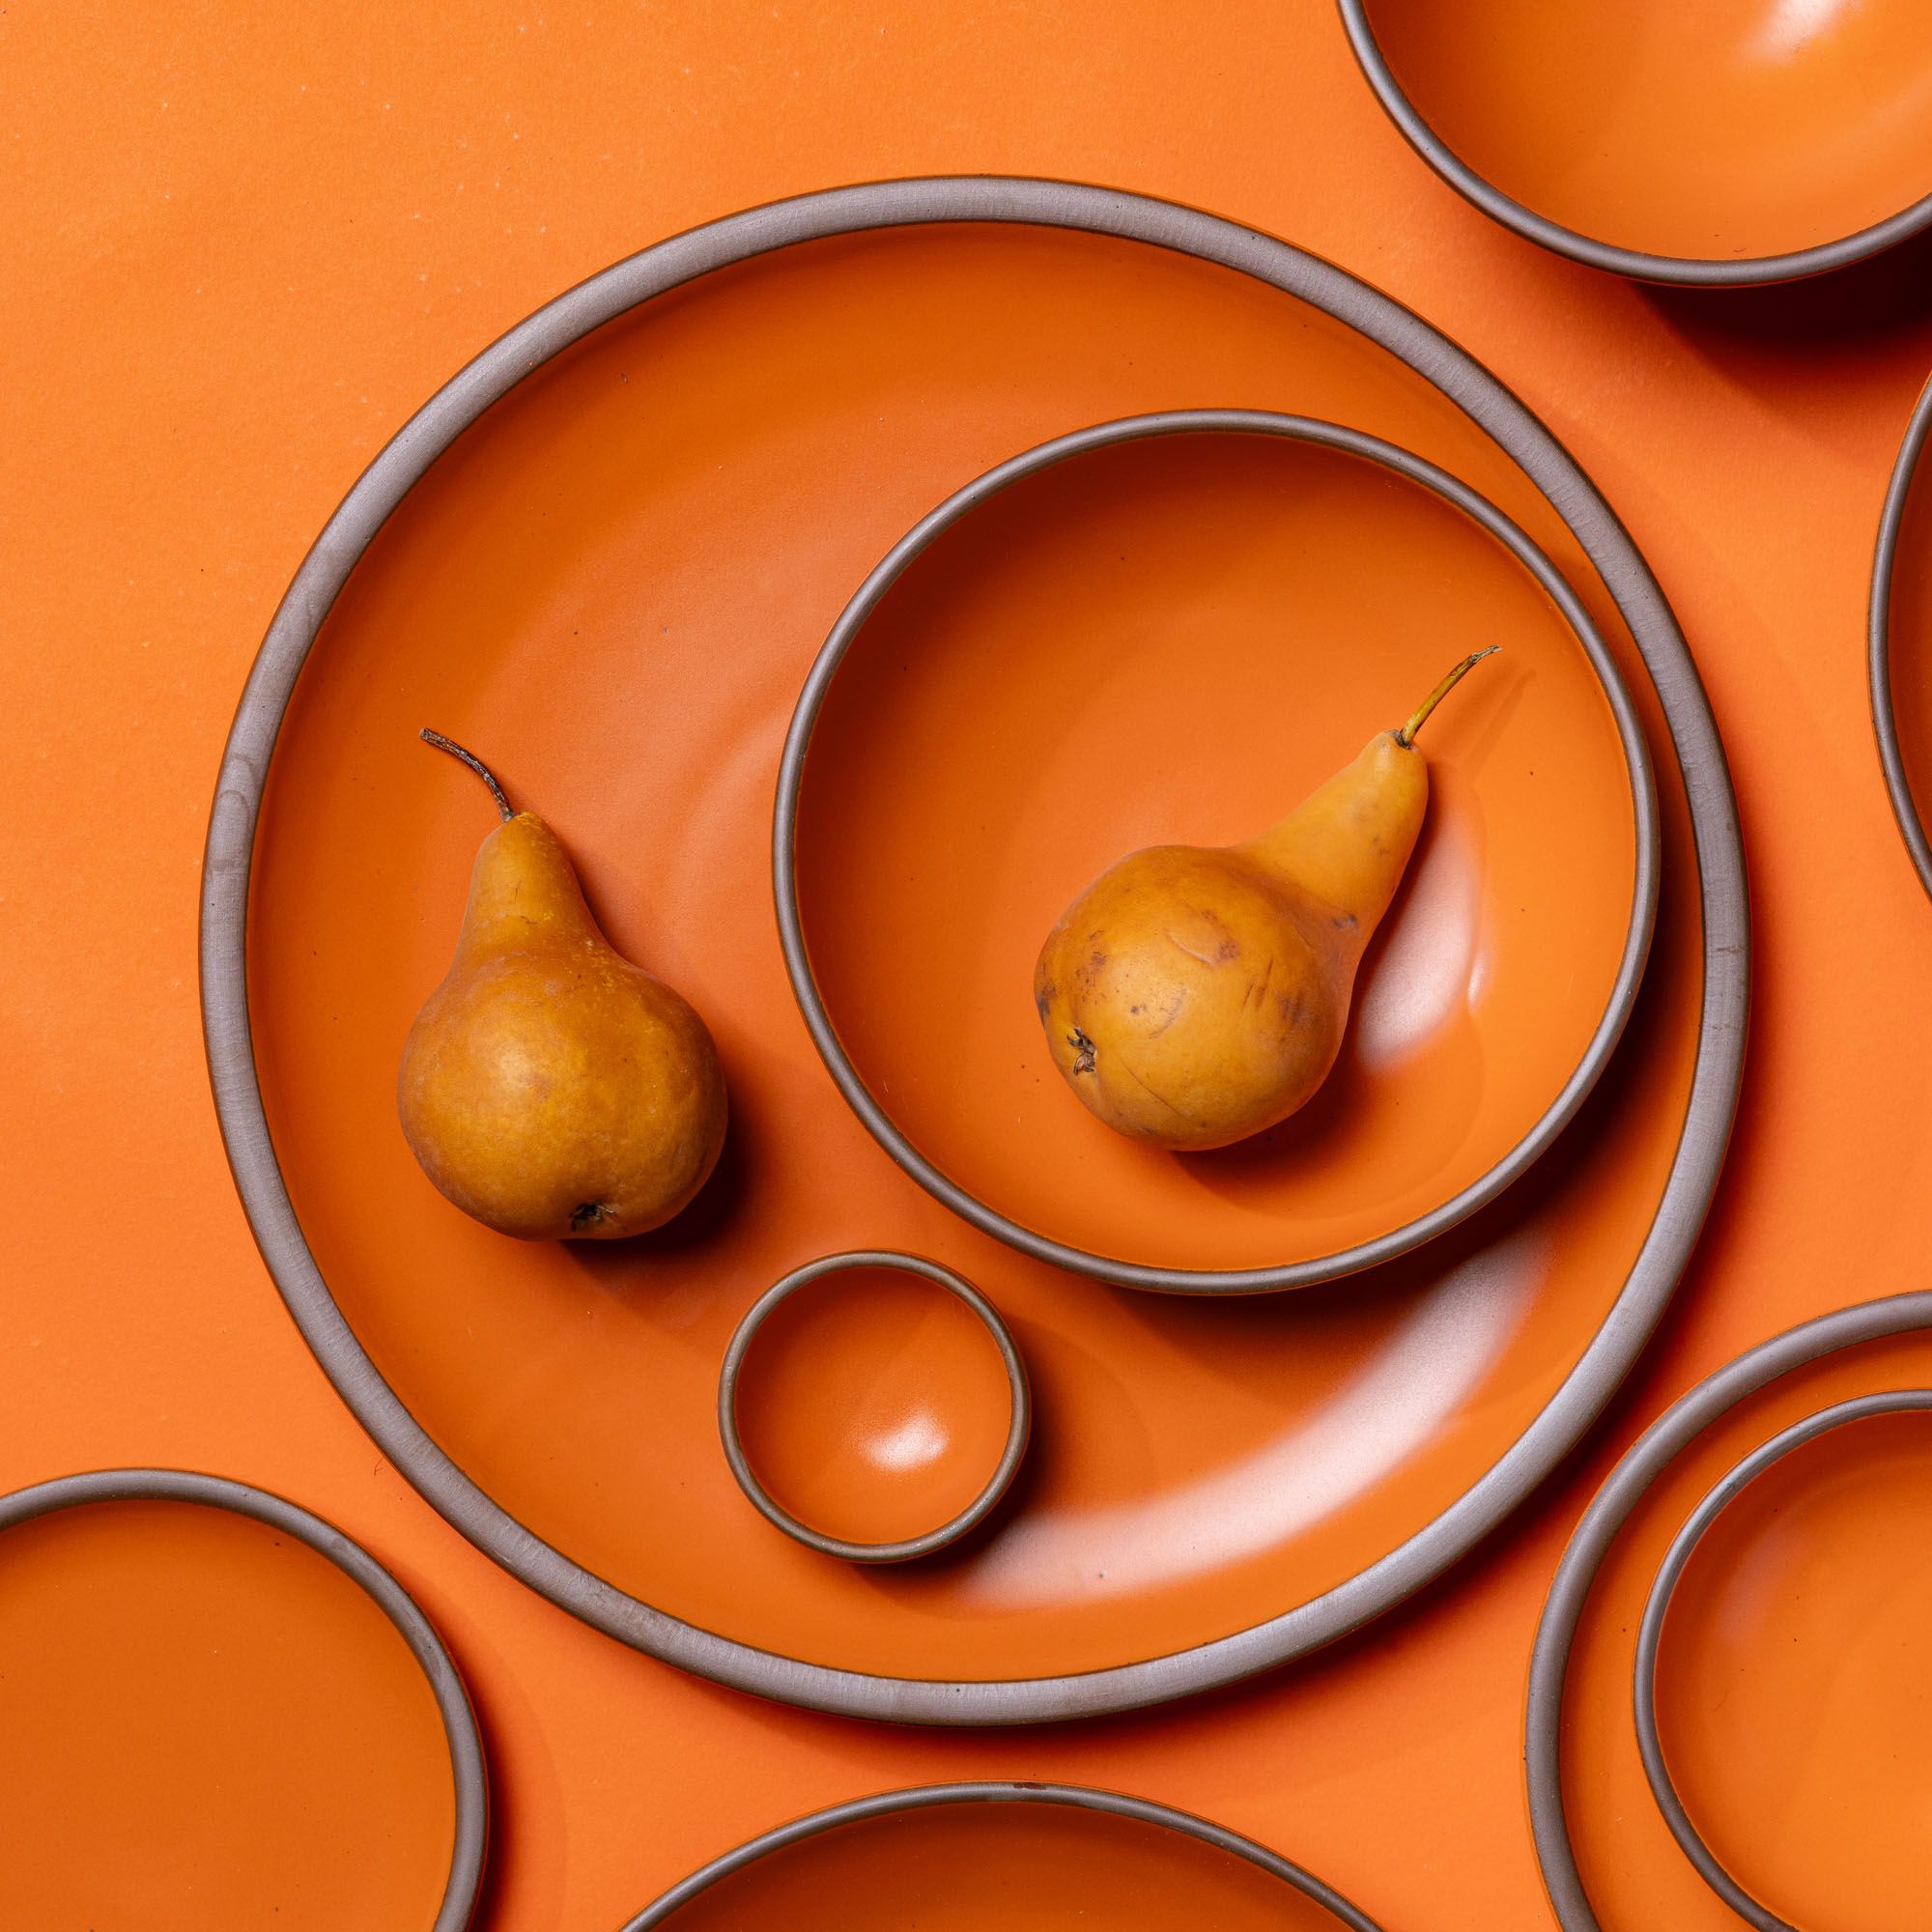 An artful arrangement of a large ceramic platter in a bold orange color with a smaller plate with pears on each.